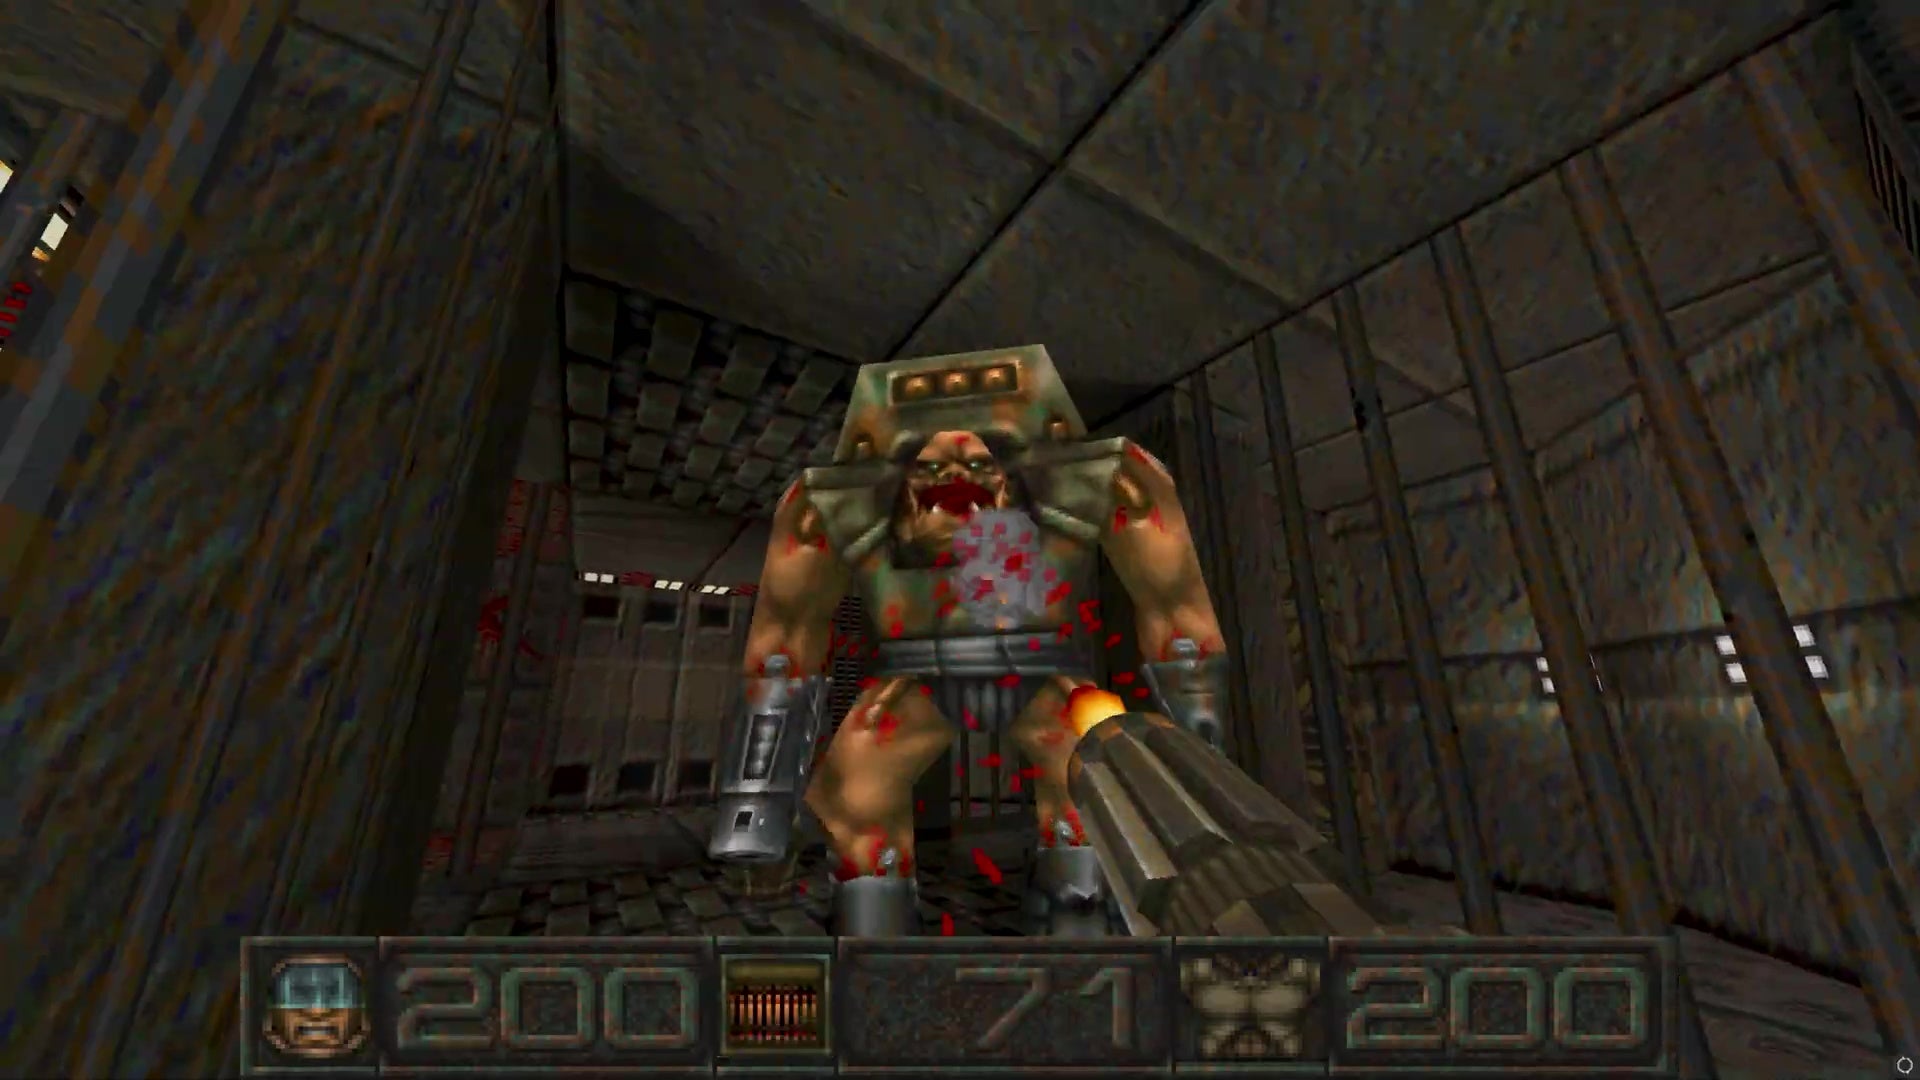 The player fires a minigun at a massive cyborg-ogre in Chasm: The Rift.